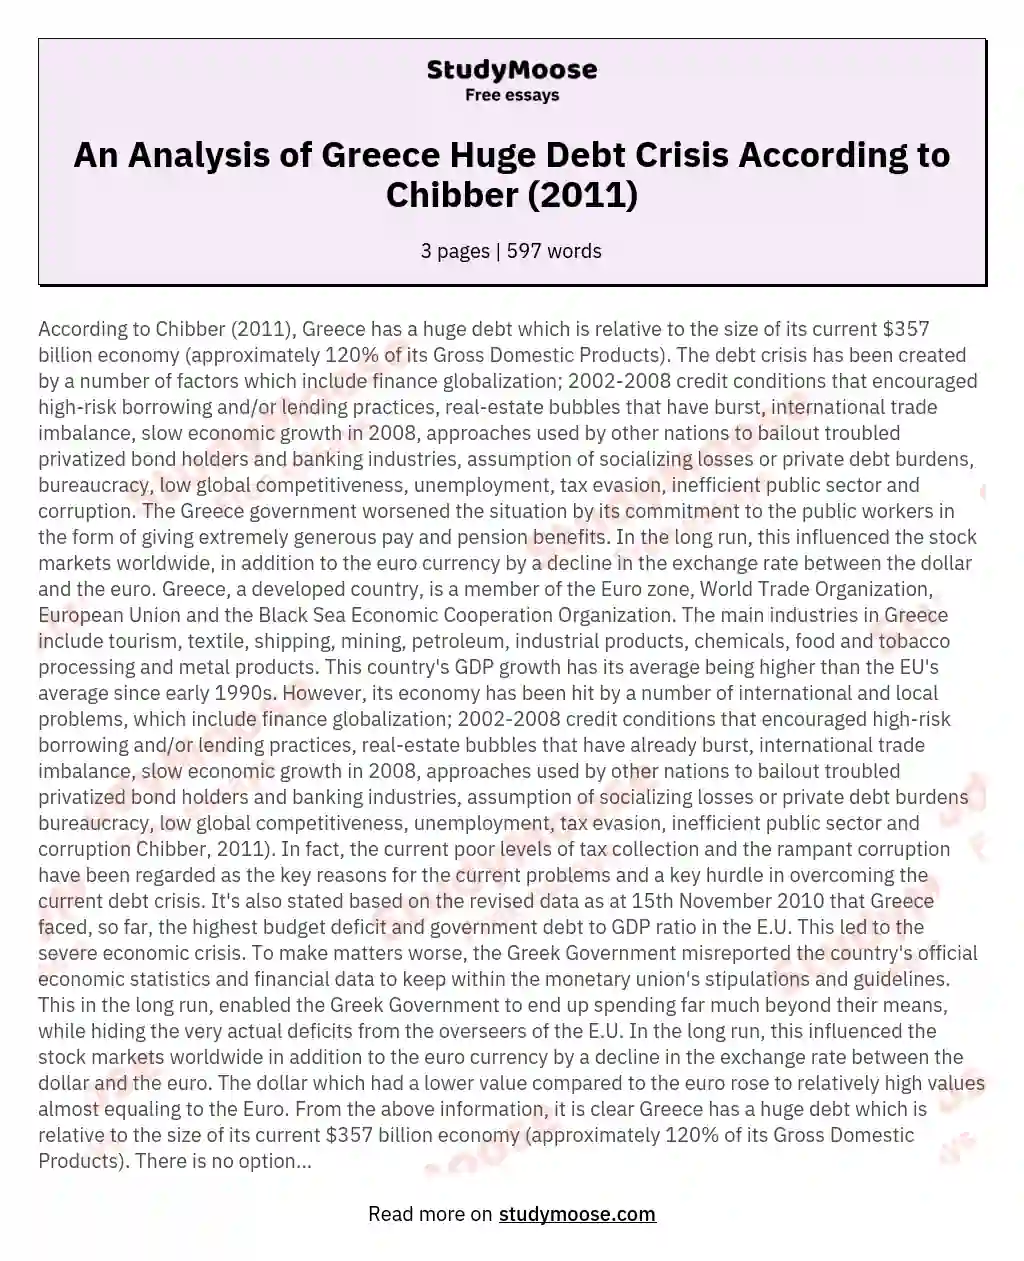 An Analysis of Greece Huge Debt Crisis According to Chibber (2011) essay